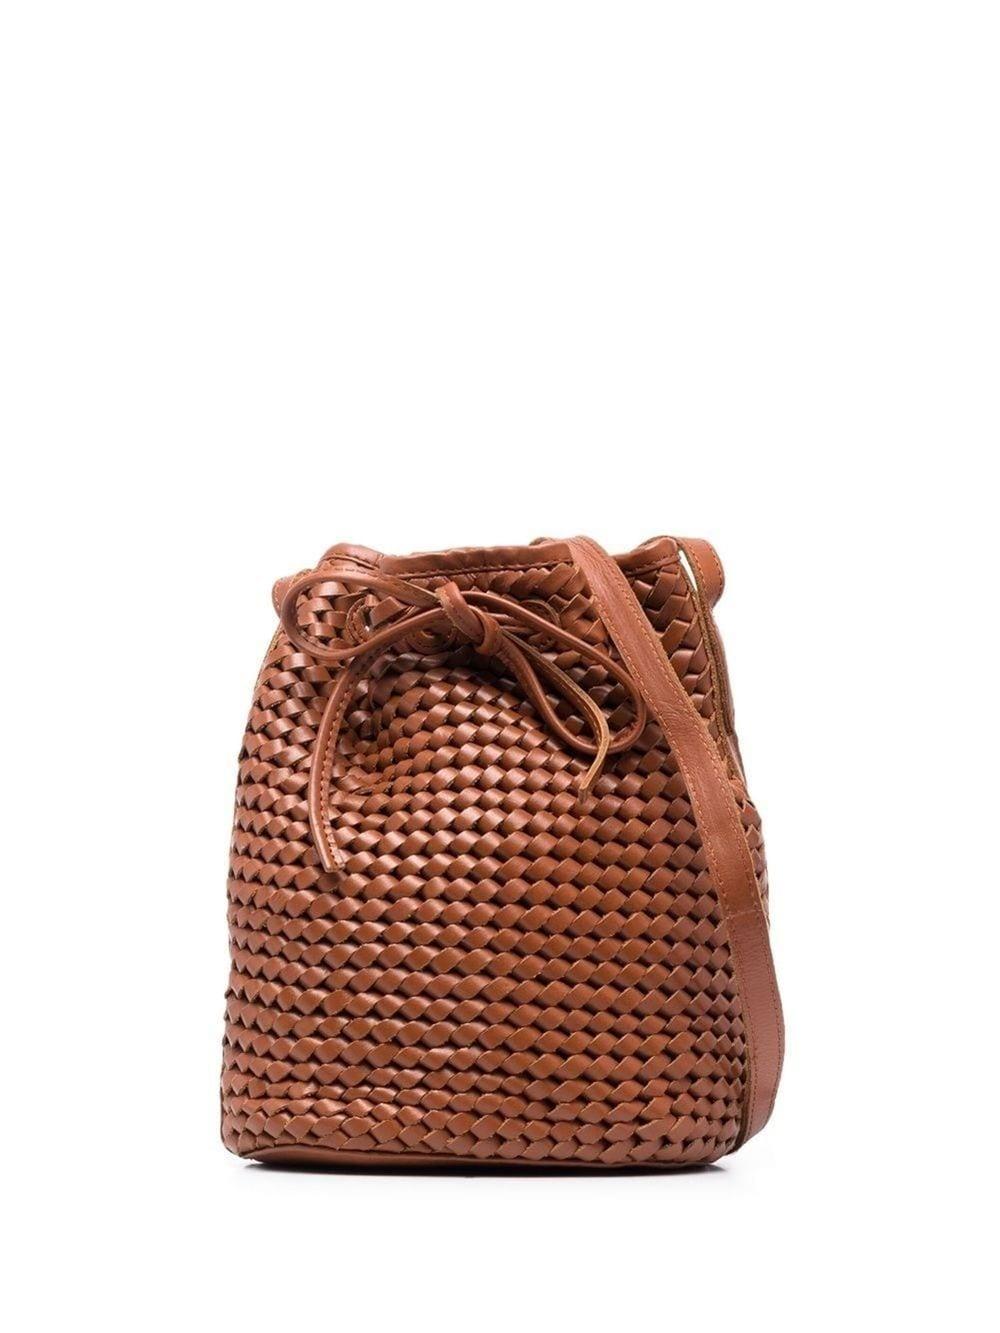 Bembien Interwoven Leather Bucket Bag in Red | Lyst